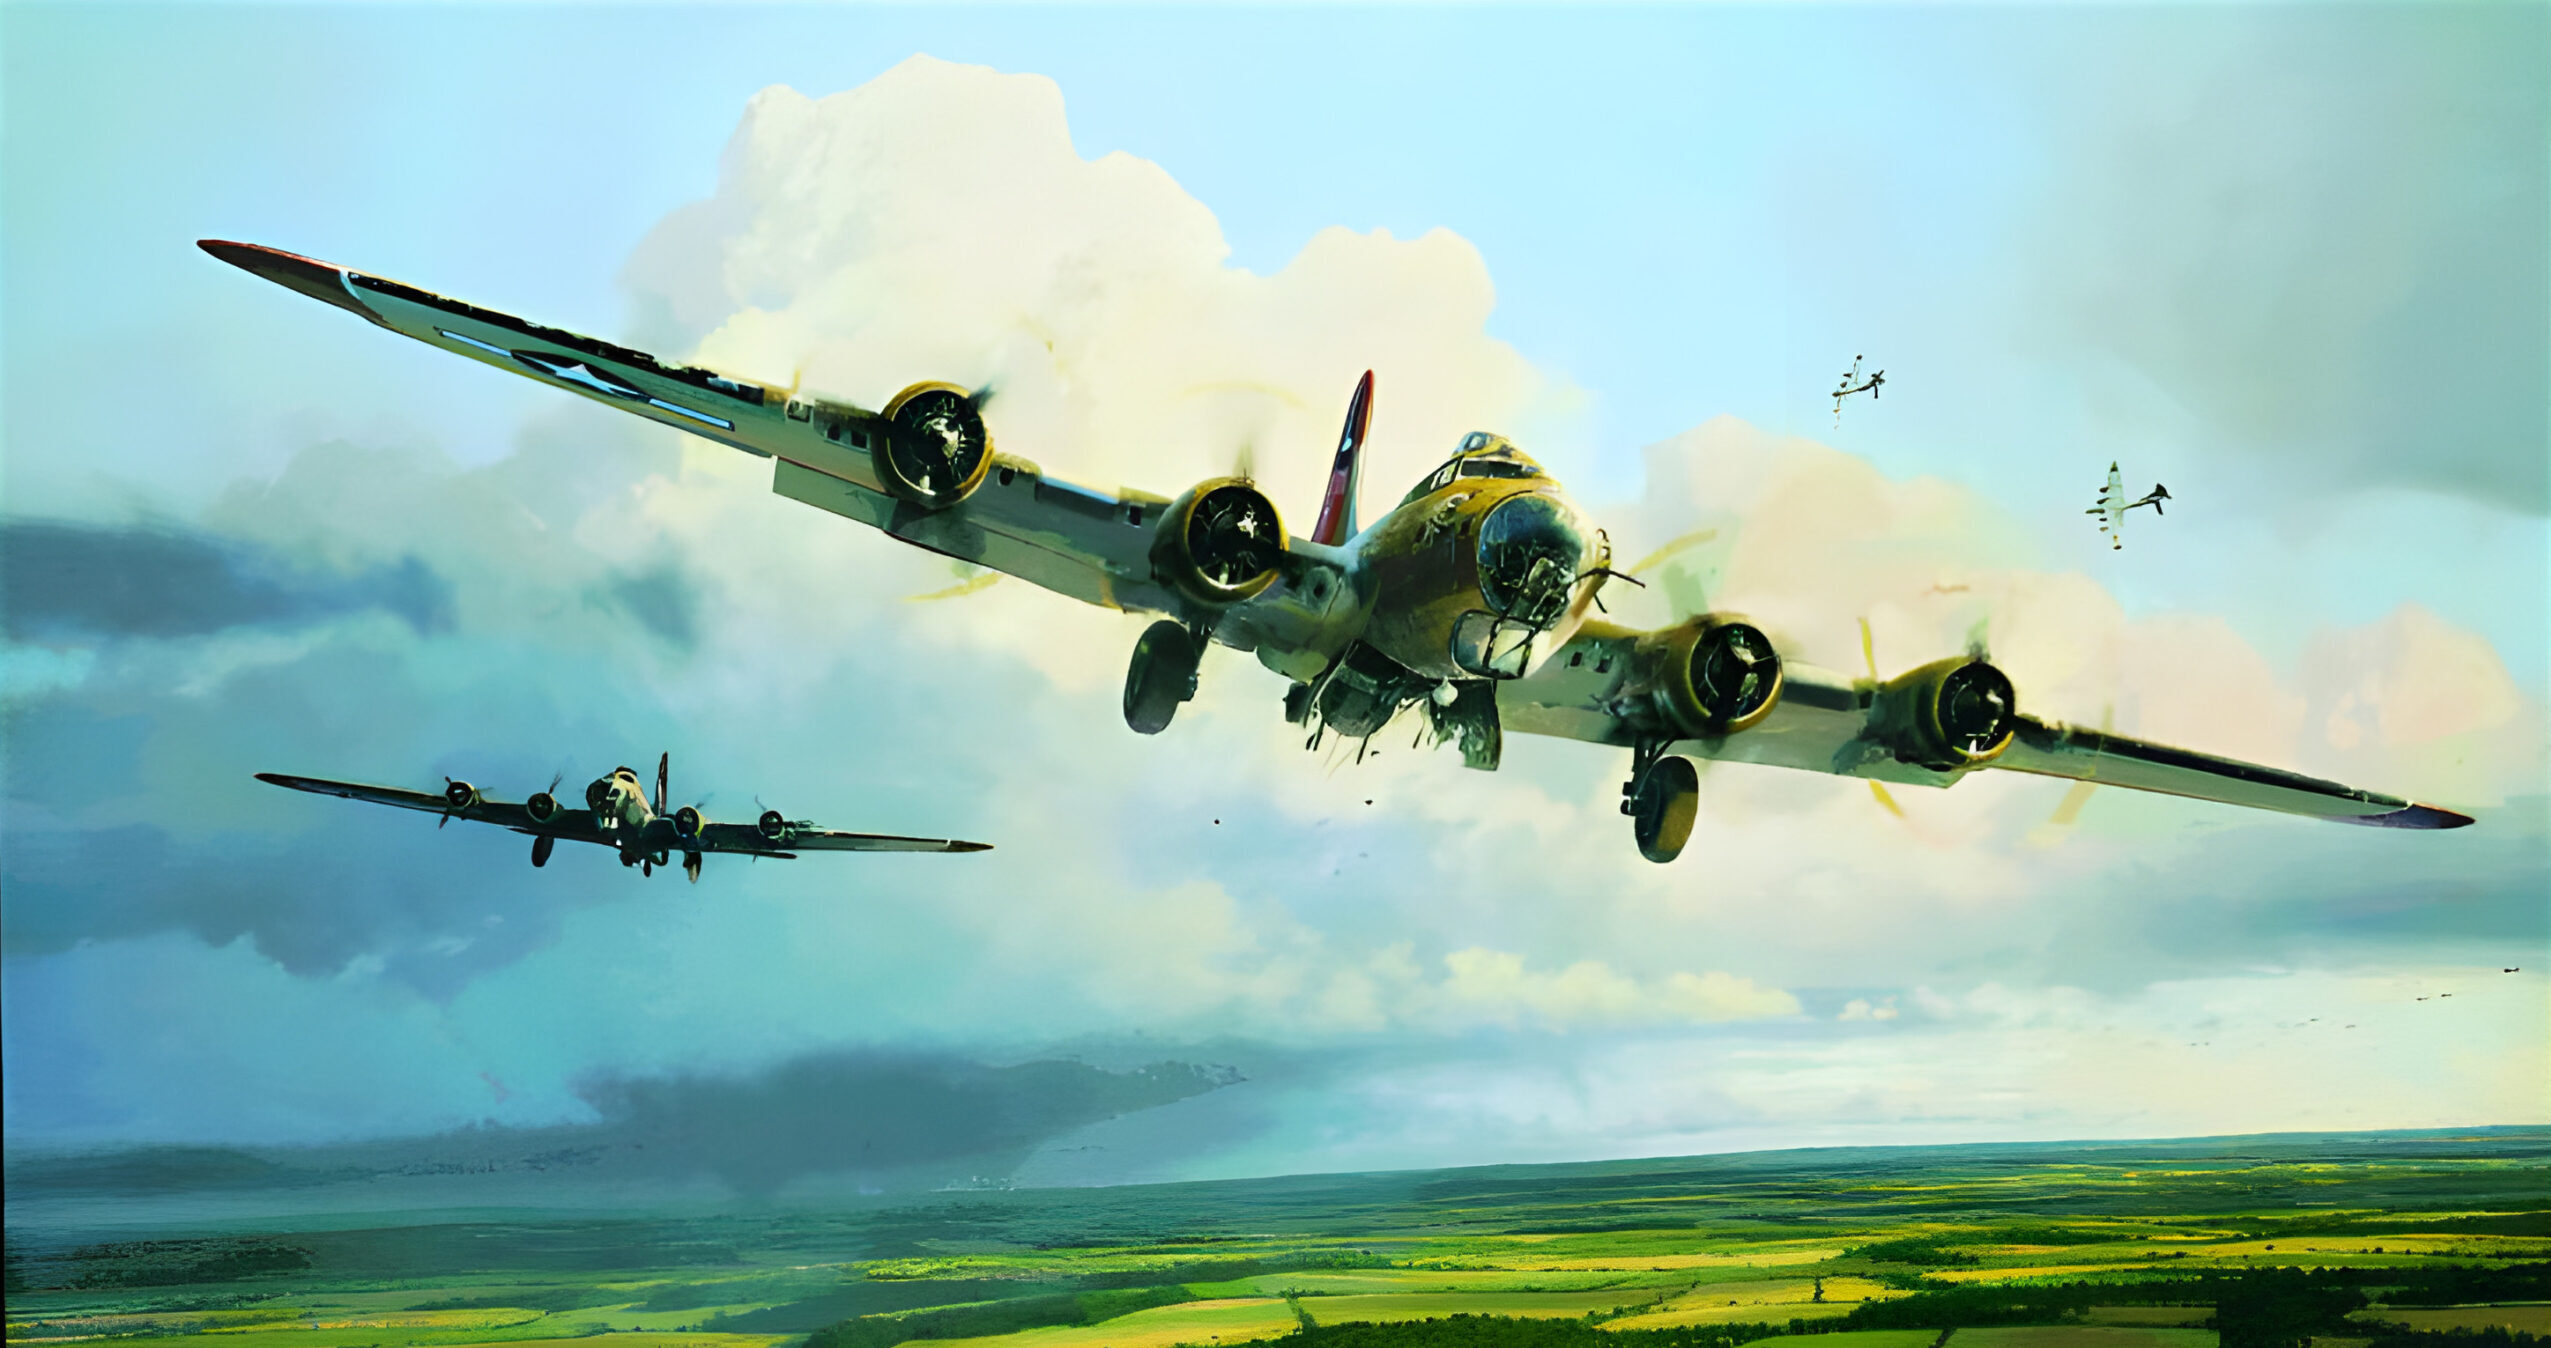 Robert Taylor’s painting Thunderbirds Over Ridgewell depicts B-17 Flying Fortress heavy bombers in flight.